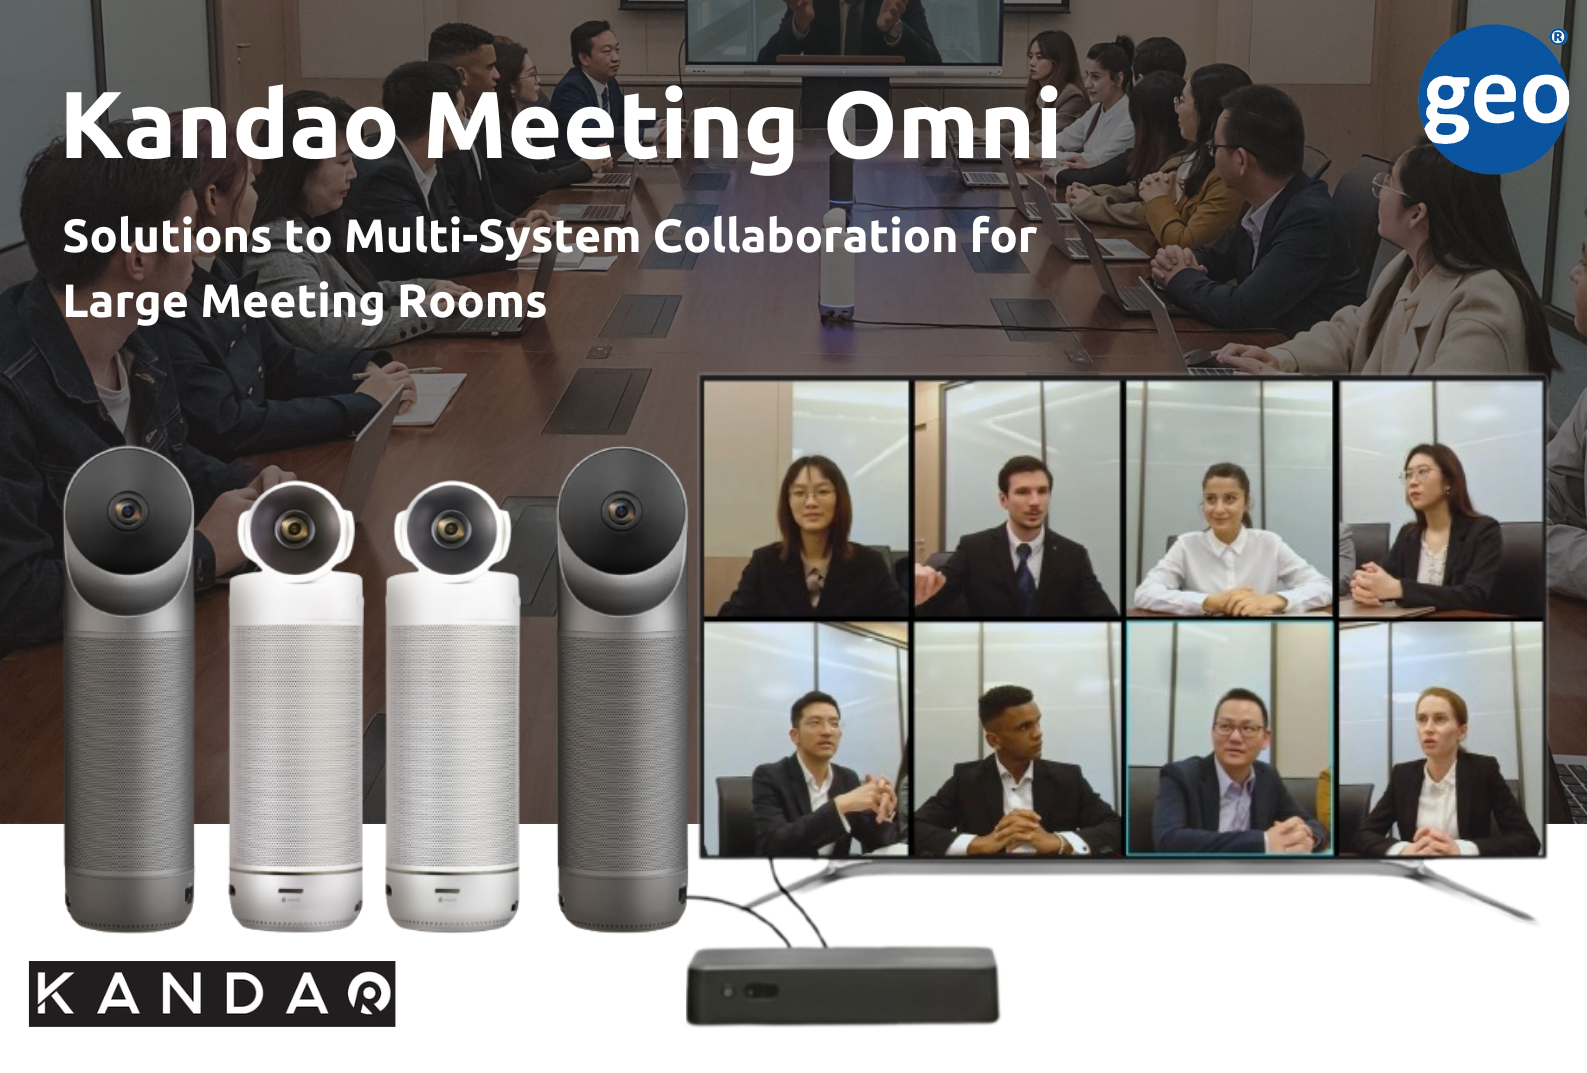 Kandao: Meeting Omni for a Solution of Multi-System Collaboration.